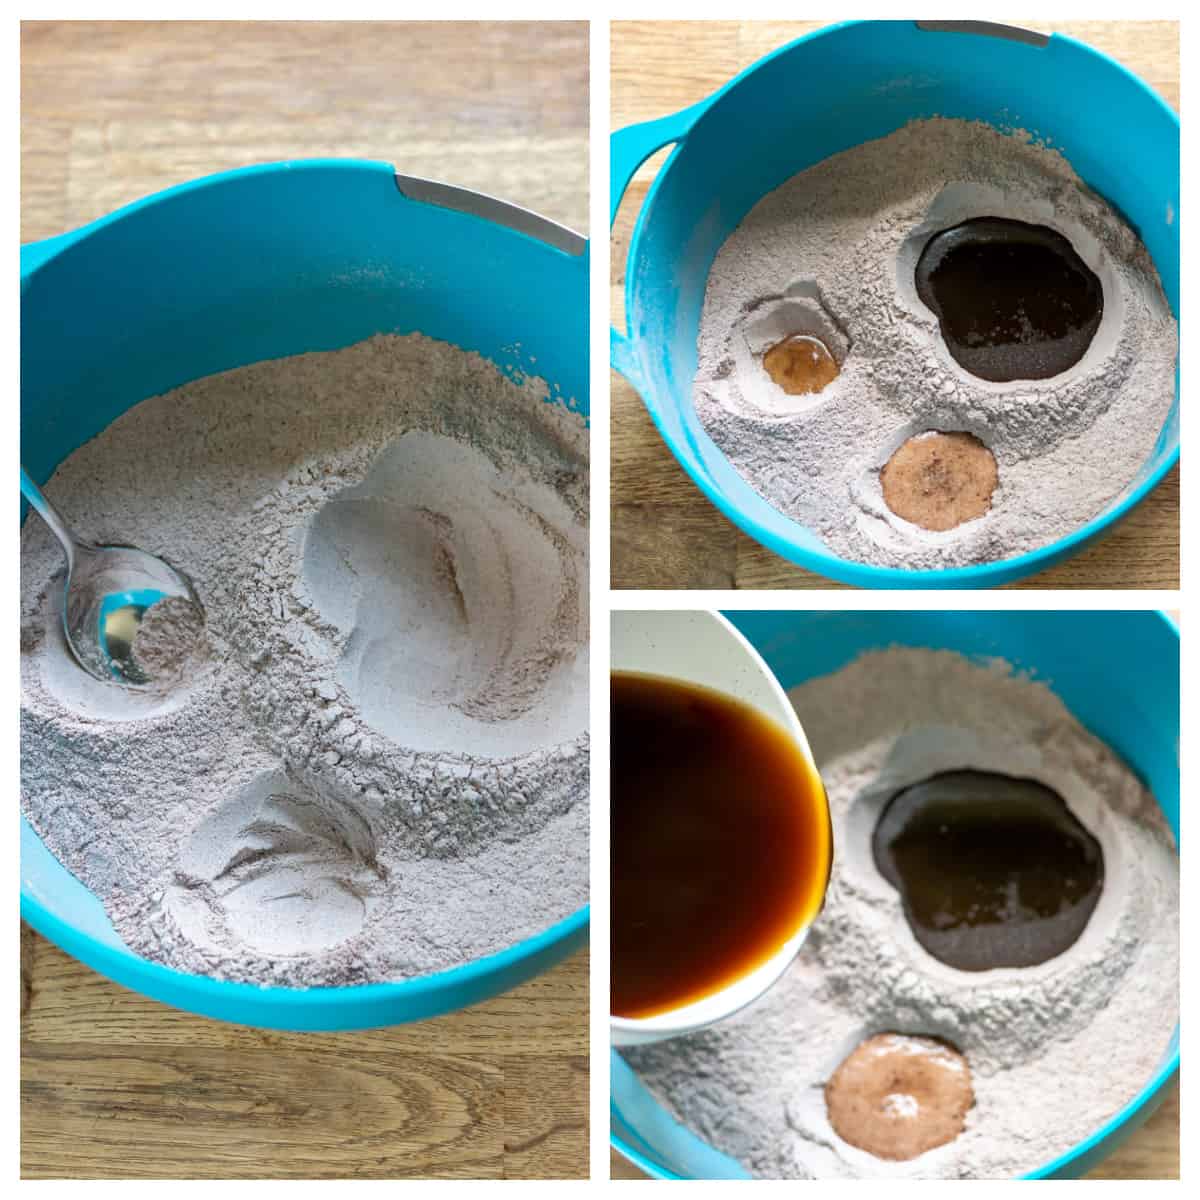 Making wells in the dry ingredients, pouring in the wet separately into the holes, then pouring in the coffee and water.